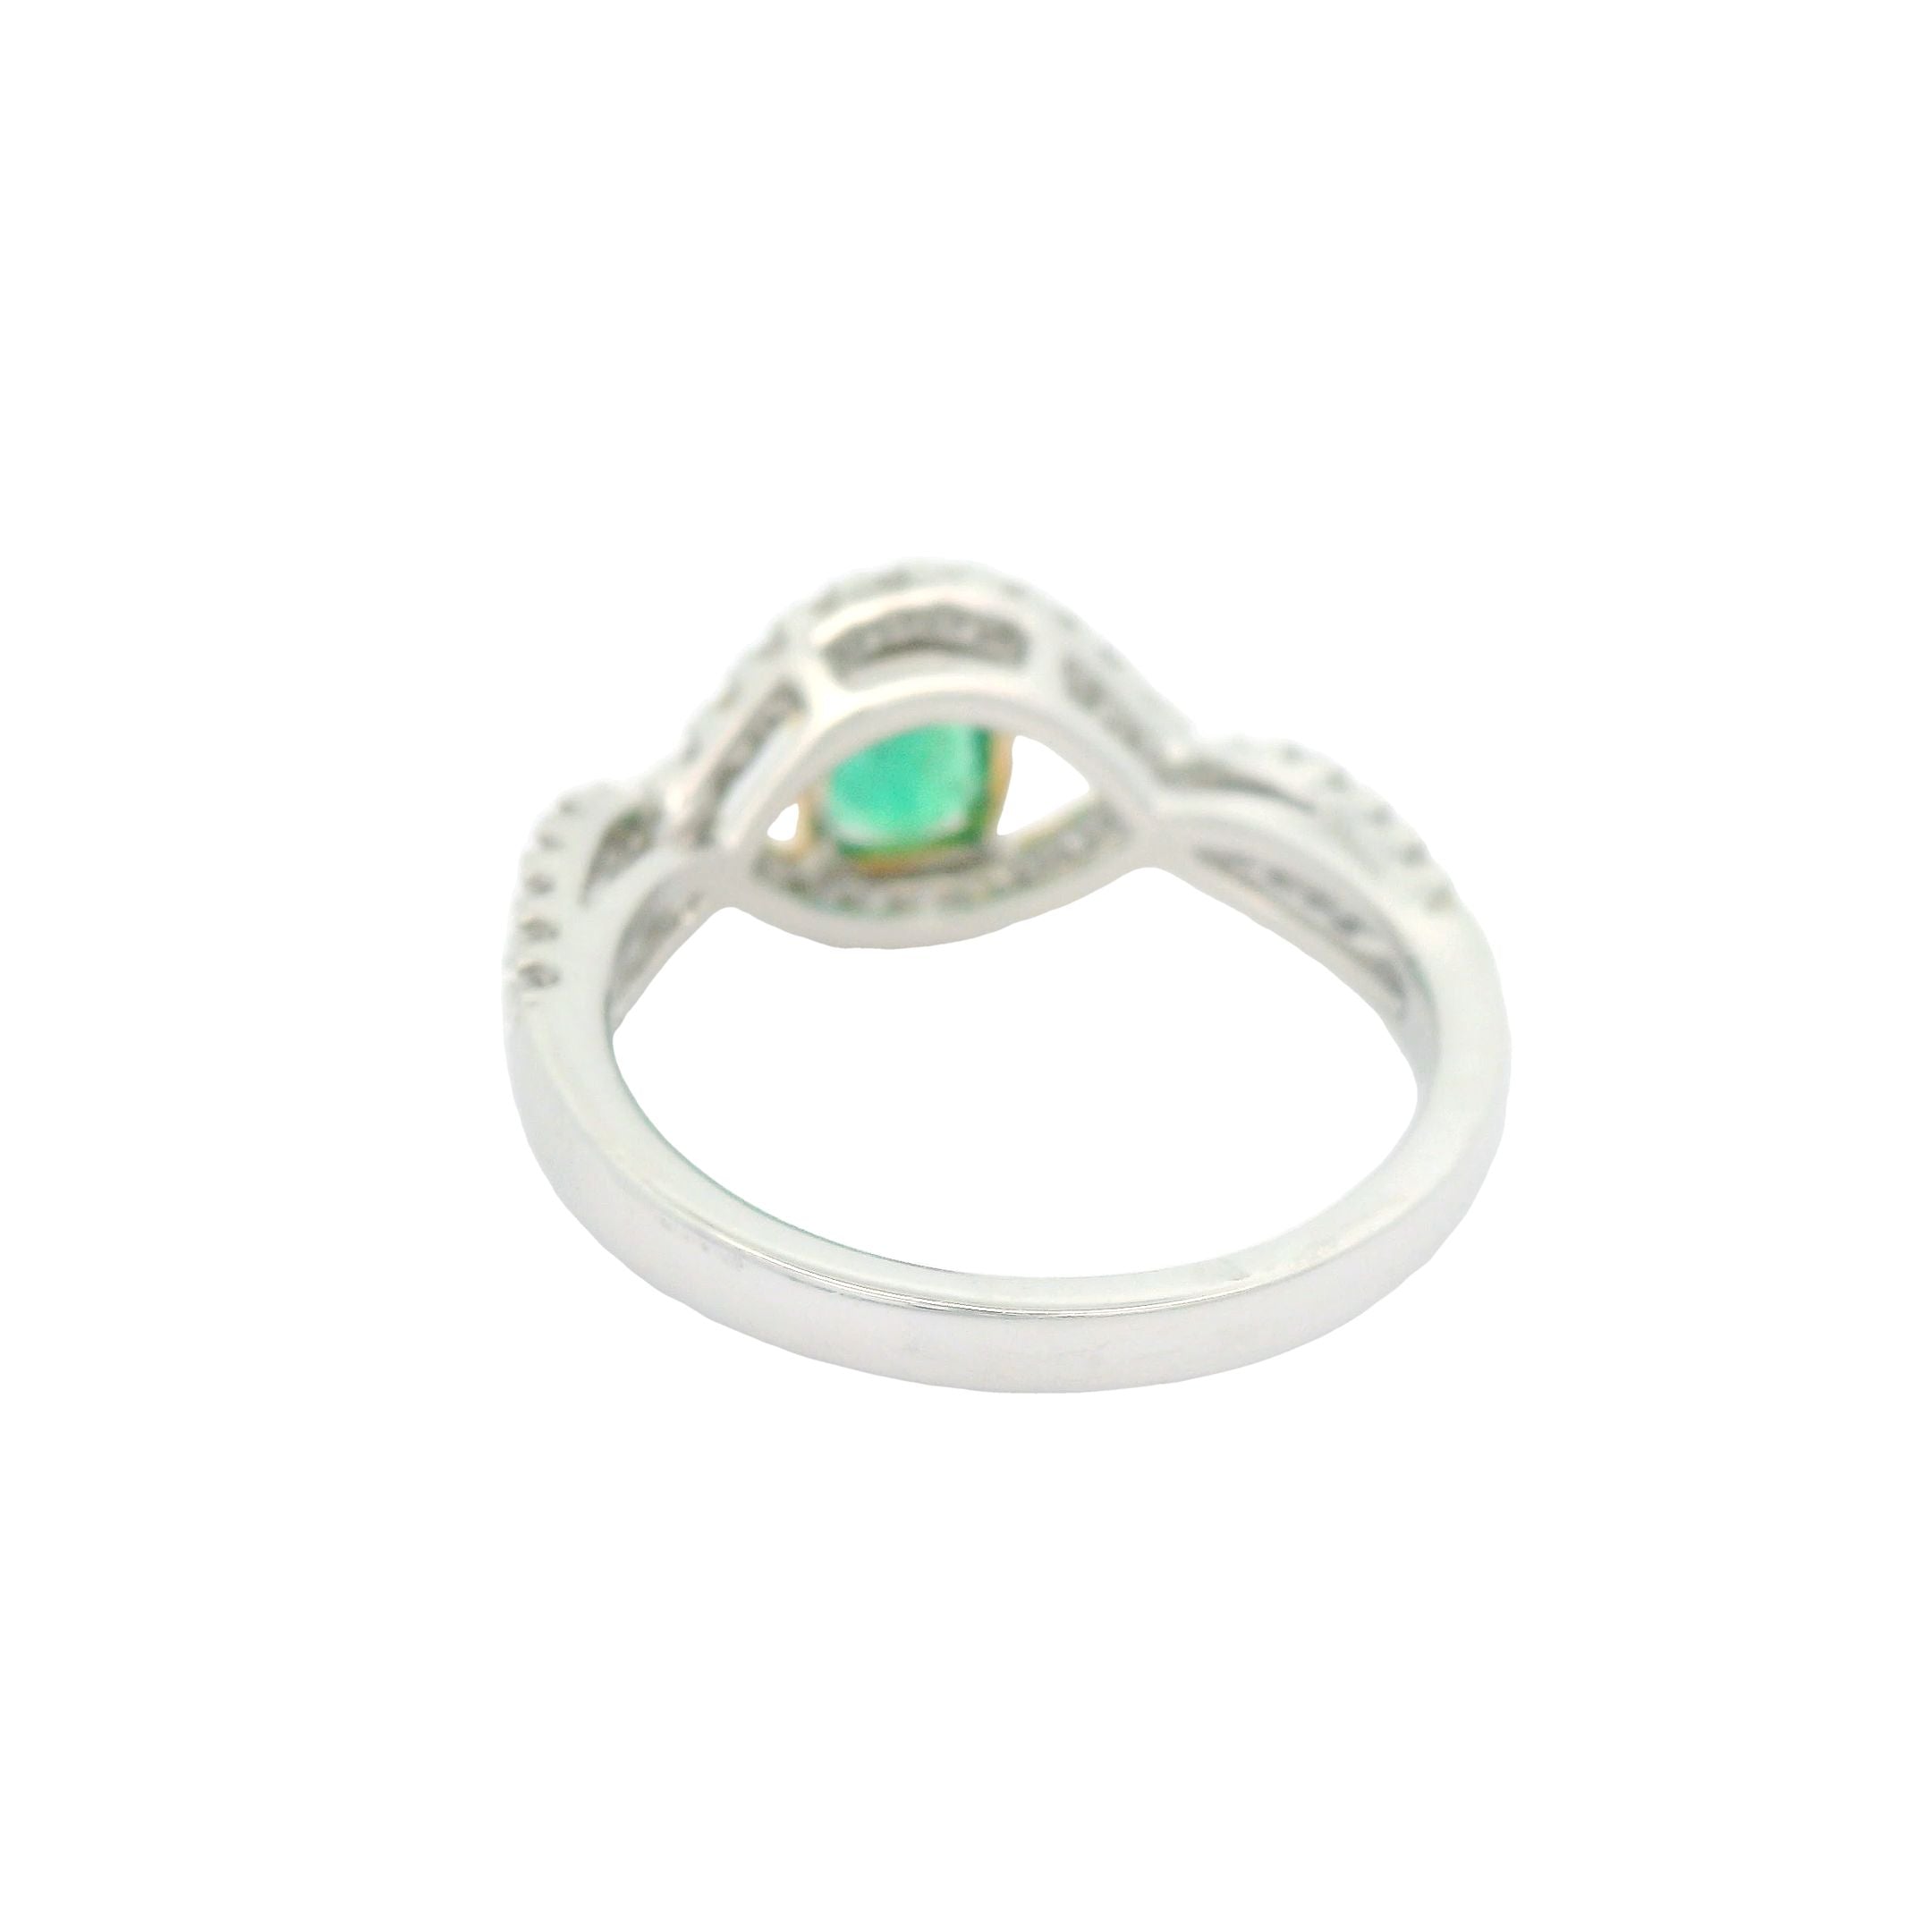 Two Tone Emerald and Diamond Ring 18KYW